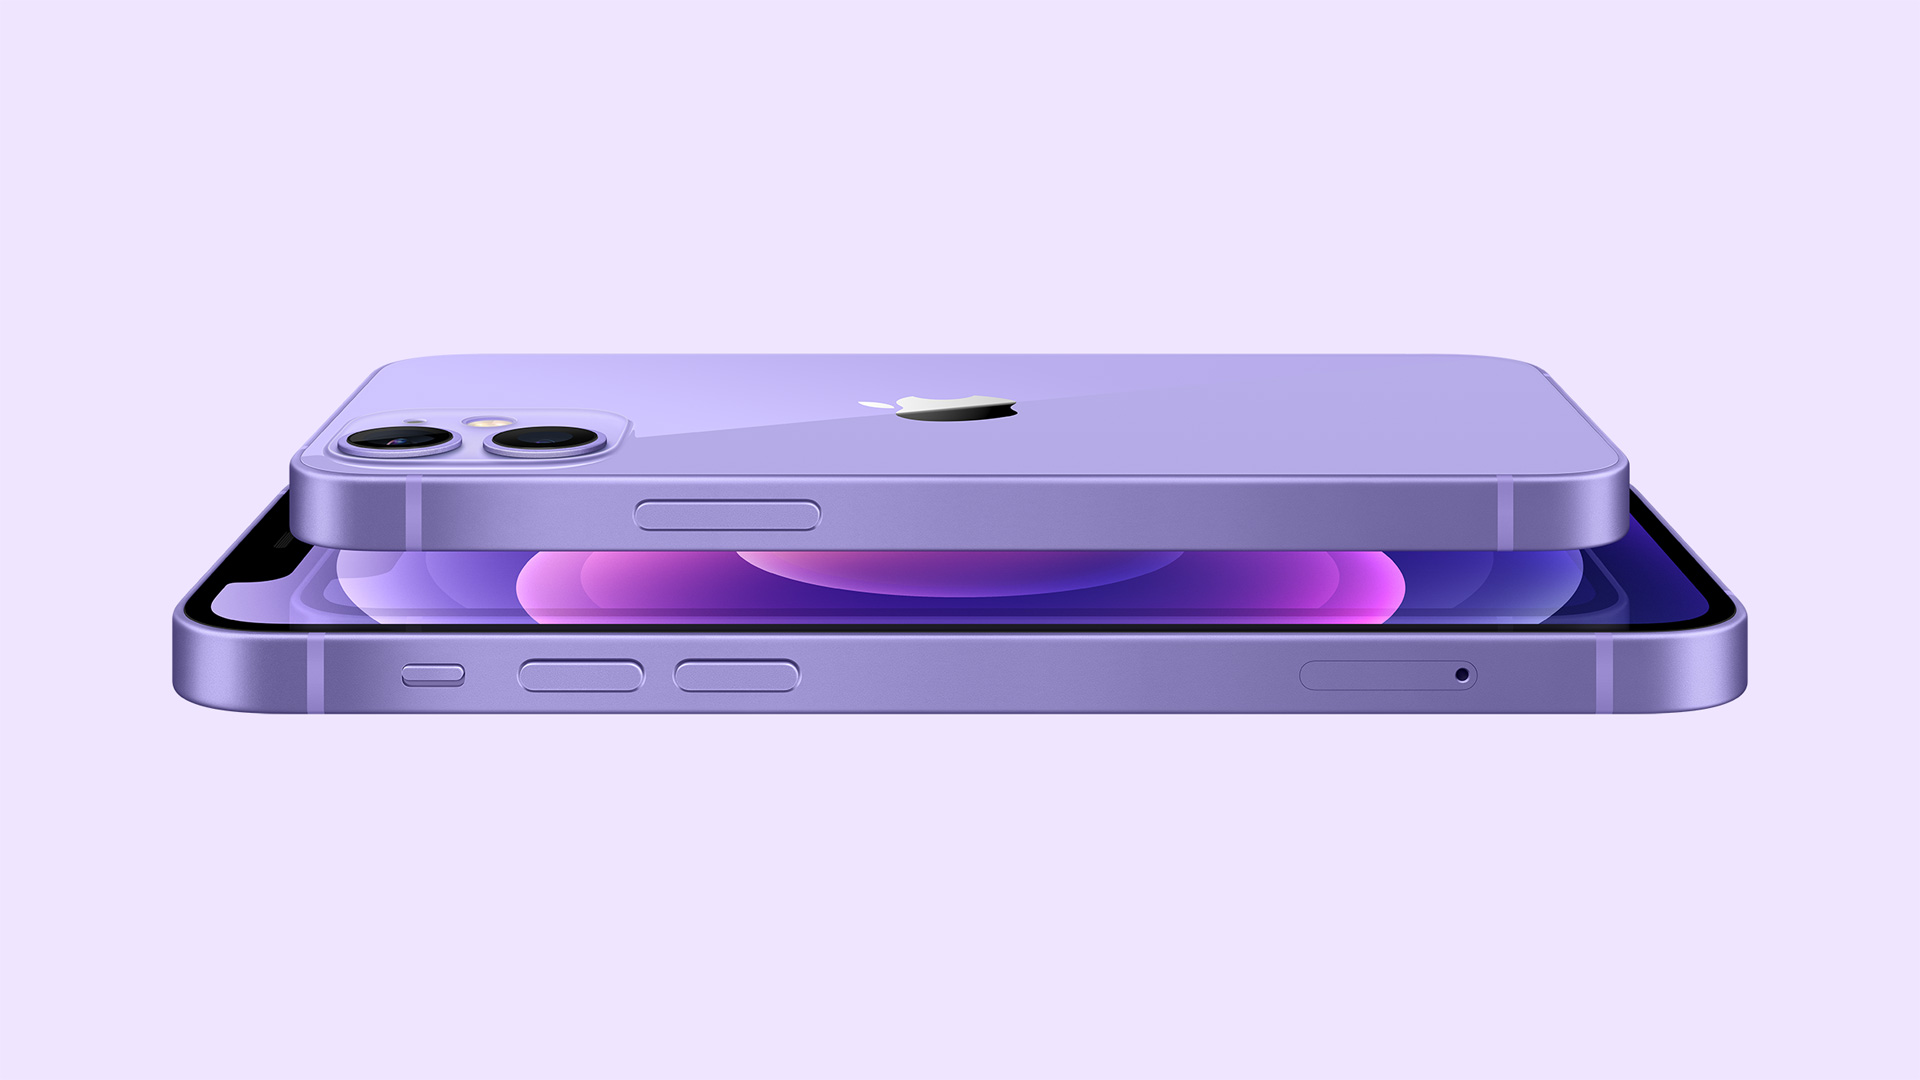 iPhone 12 and iPhone 12 mini in an all-new purple finish available at Vodafone Romania